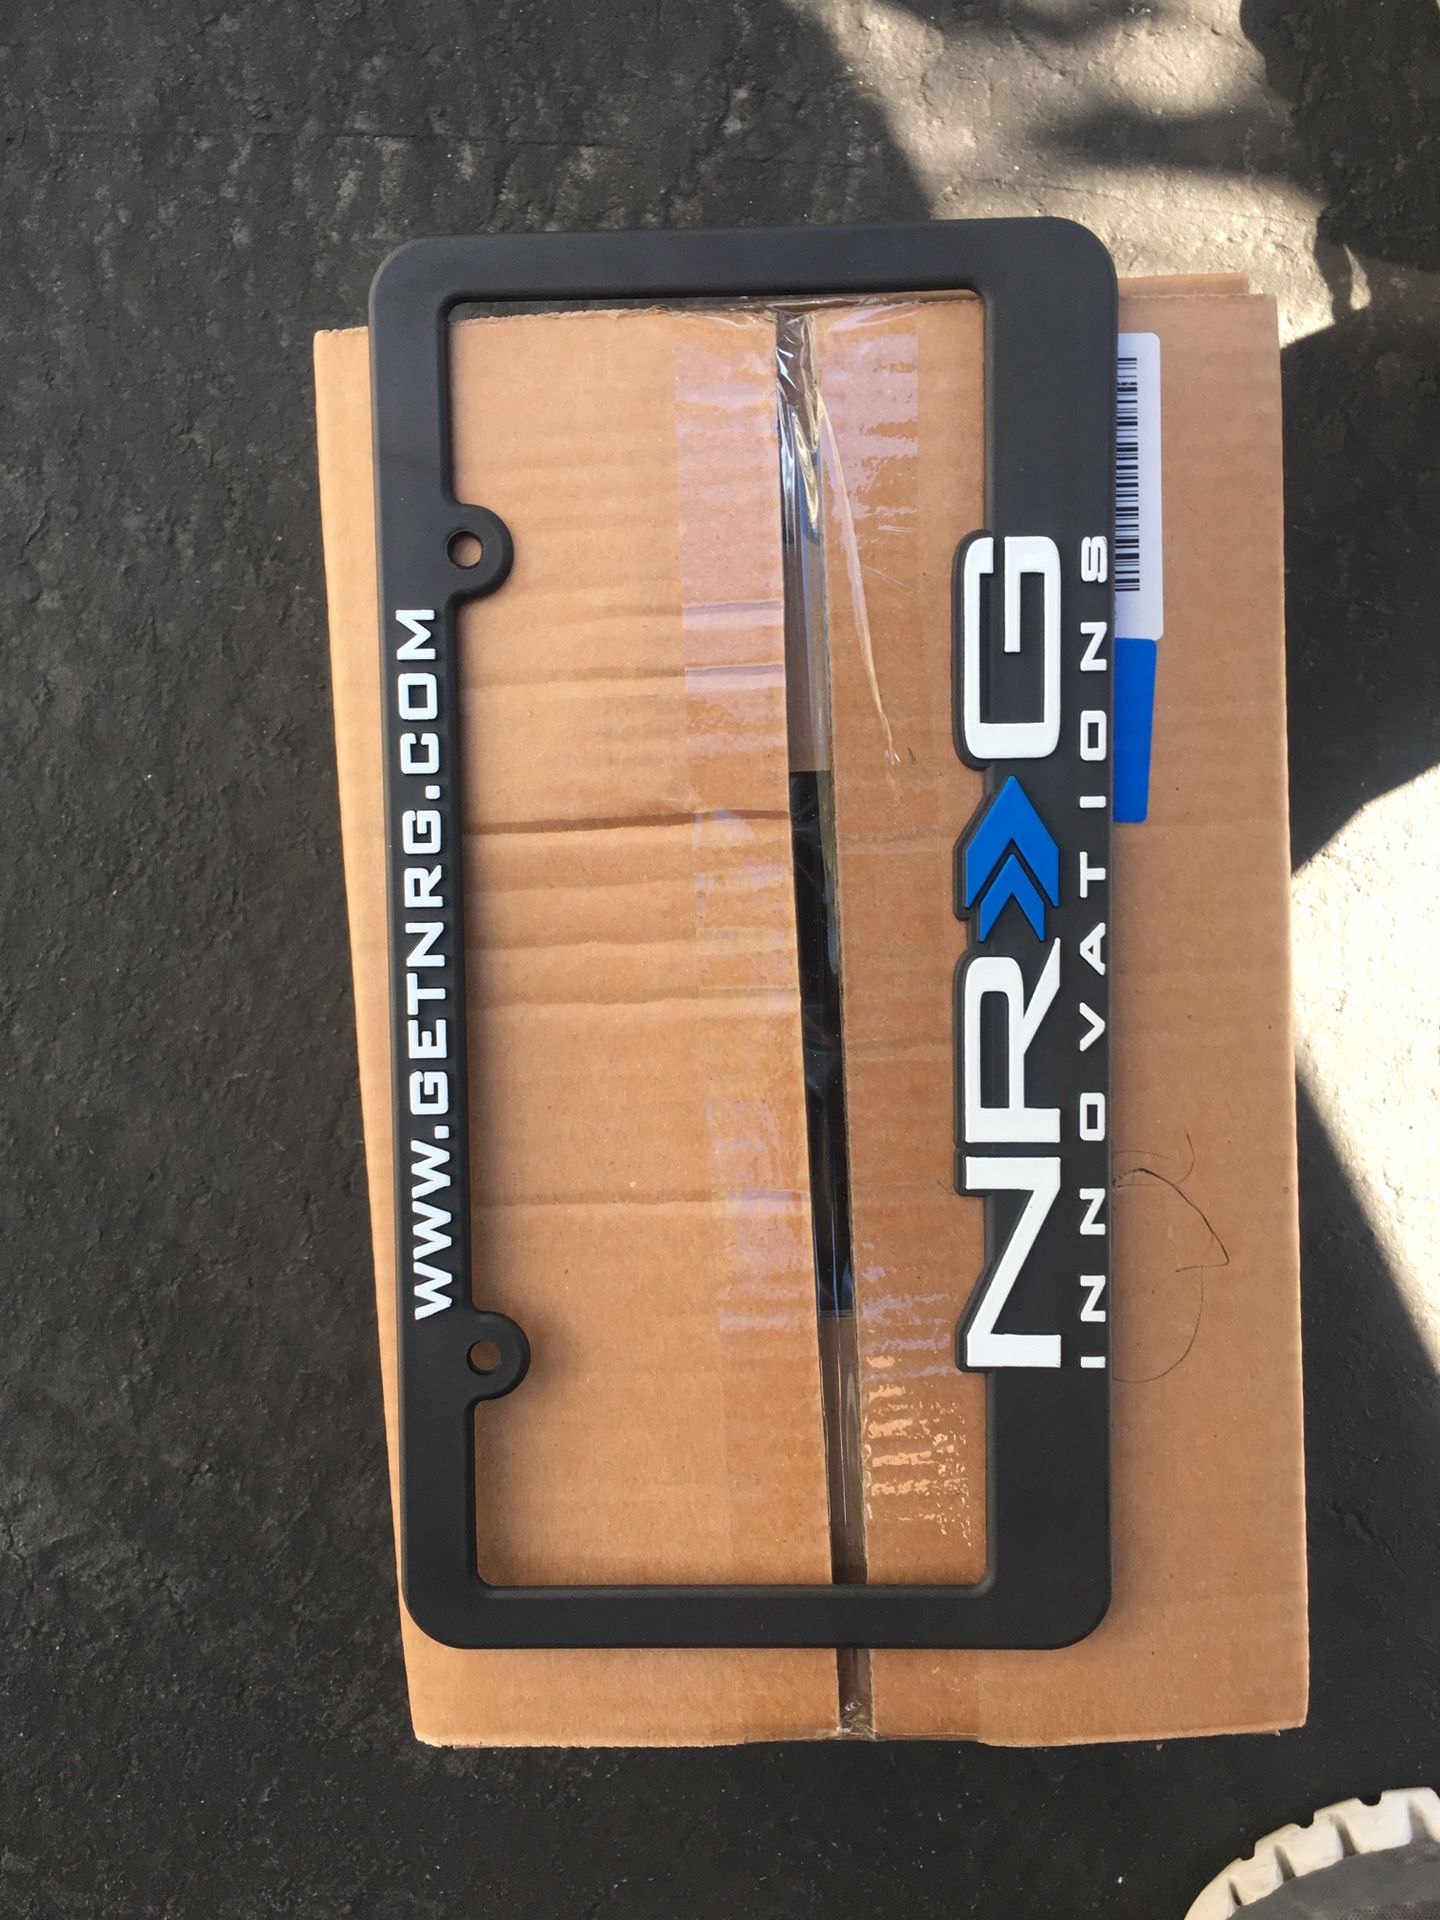 New NRG license plate the Pair